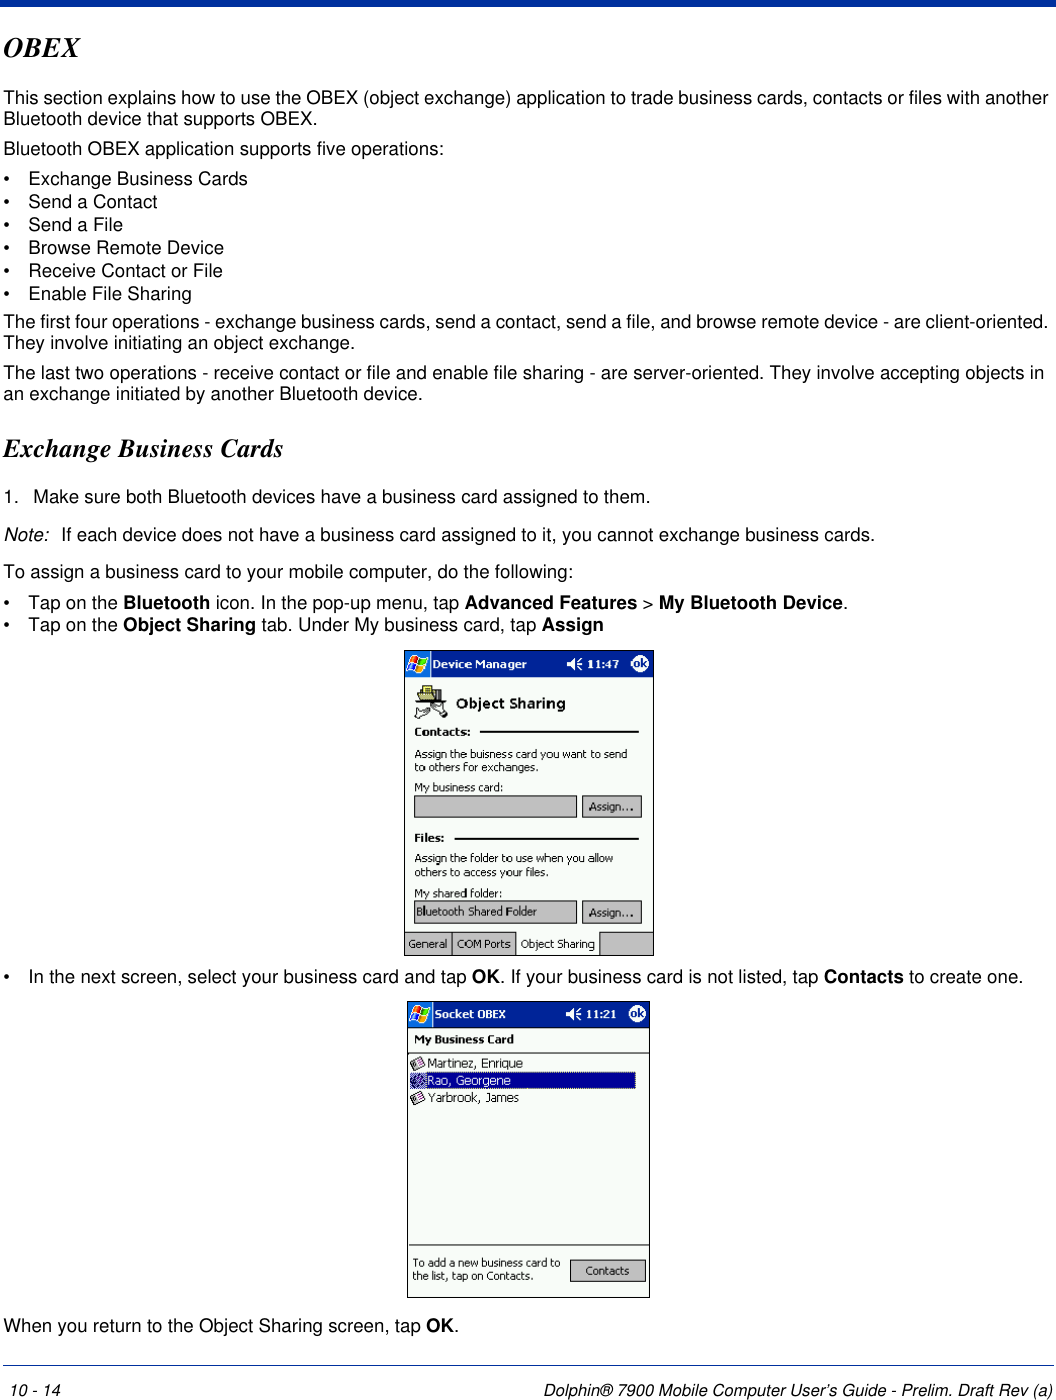 10 - 14 Dolphin® 7900 Mobile Computer User’s Guide - Prelim. Draft Rev (a)OBEXThis section explains how to use the OBEX (object exchange) application to trade business cards, contacts or files with another Bluetooth device that supports OBEX.Bluetooth OBEX application supports five operations:•           Exchange Business Cards•           Send a Contact•           Send a File•           Browse Remote Device•           Receive Contact or File•           Enable File SharingThe first four operations - exchange business cards, send a contact, send a file, and browse remote device - are client-oriented. They involve initiating an object exchange.The last two operations - receive contact or file and enable file sharing - are server-oriented. They involve accepting objects in an exchange initiated by another Bluetooth device.Exchange Business Cards1. Make sure both Bluetooth devices have a business card assigned to them.Note: If each device does not have a business card assigned to it, you cannot exchange business cards.To assign a business card to your mobile computer, do the following:•           Tap on the Bluetooth icon. In the pop-up menu, tap Advanced Features &gt; My Bluetooth Device.•           Tap on the Object Sharing tab. Under My business card, tap Assign•           In the next screen, select your business card and tap OK. If your business card is not listed, tap Contacts to create one.When you return to the Object Sharing screen, tap OK.